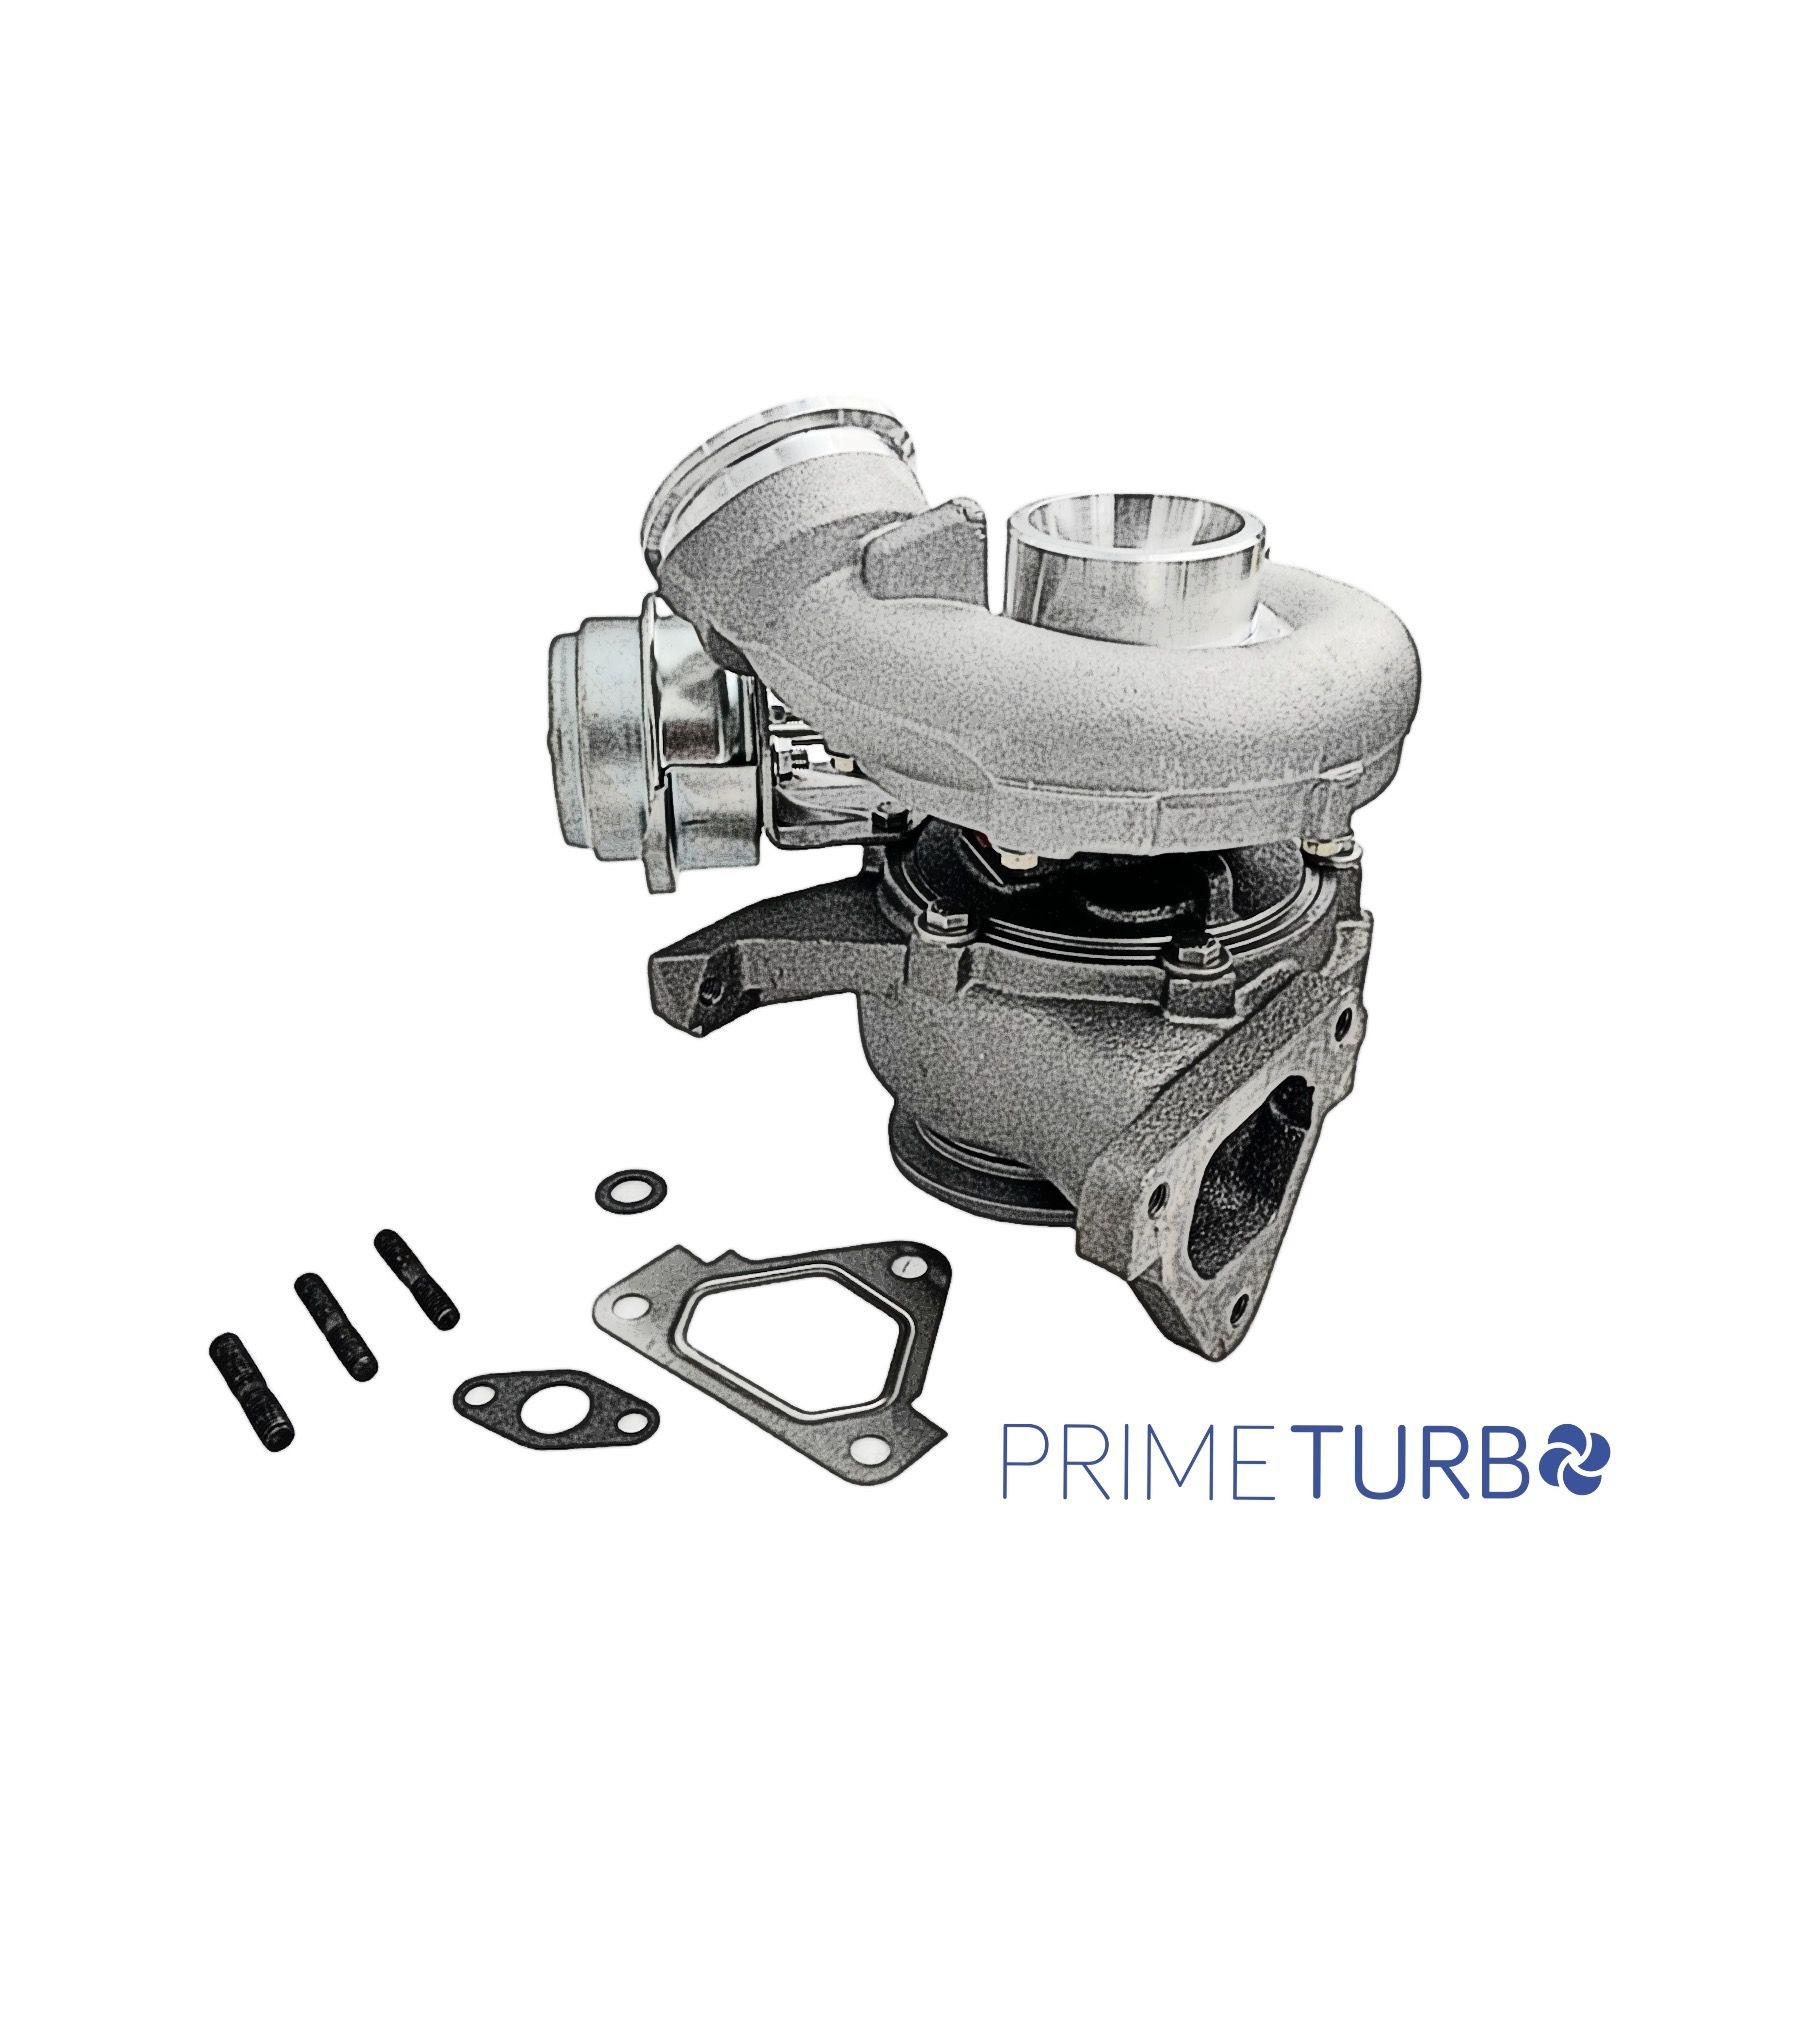 Original V00553T Prime Turbo Turbocharger experience and price